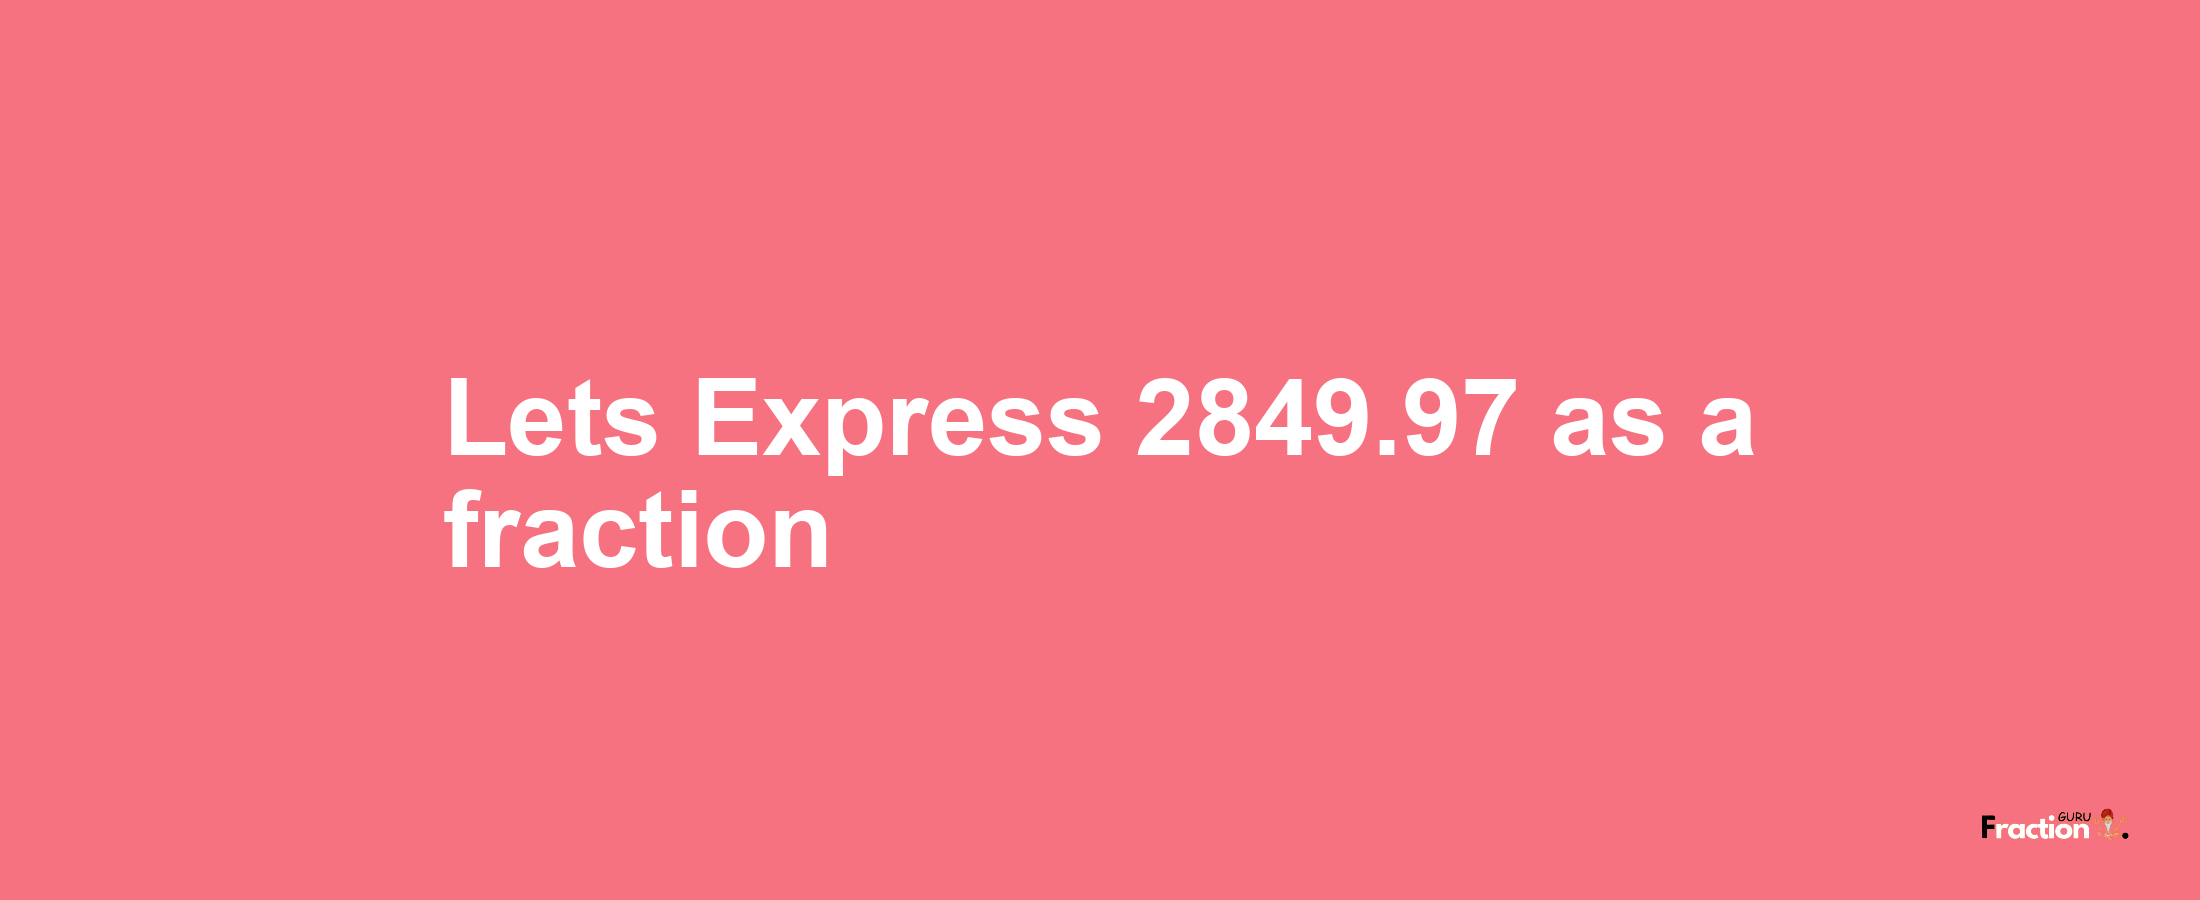 Lets Express 2849.97 as afraction